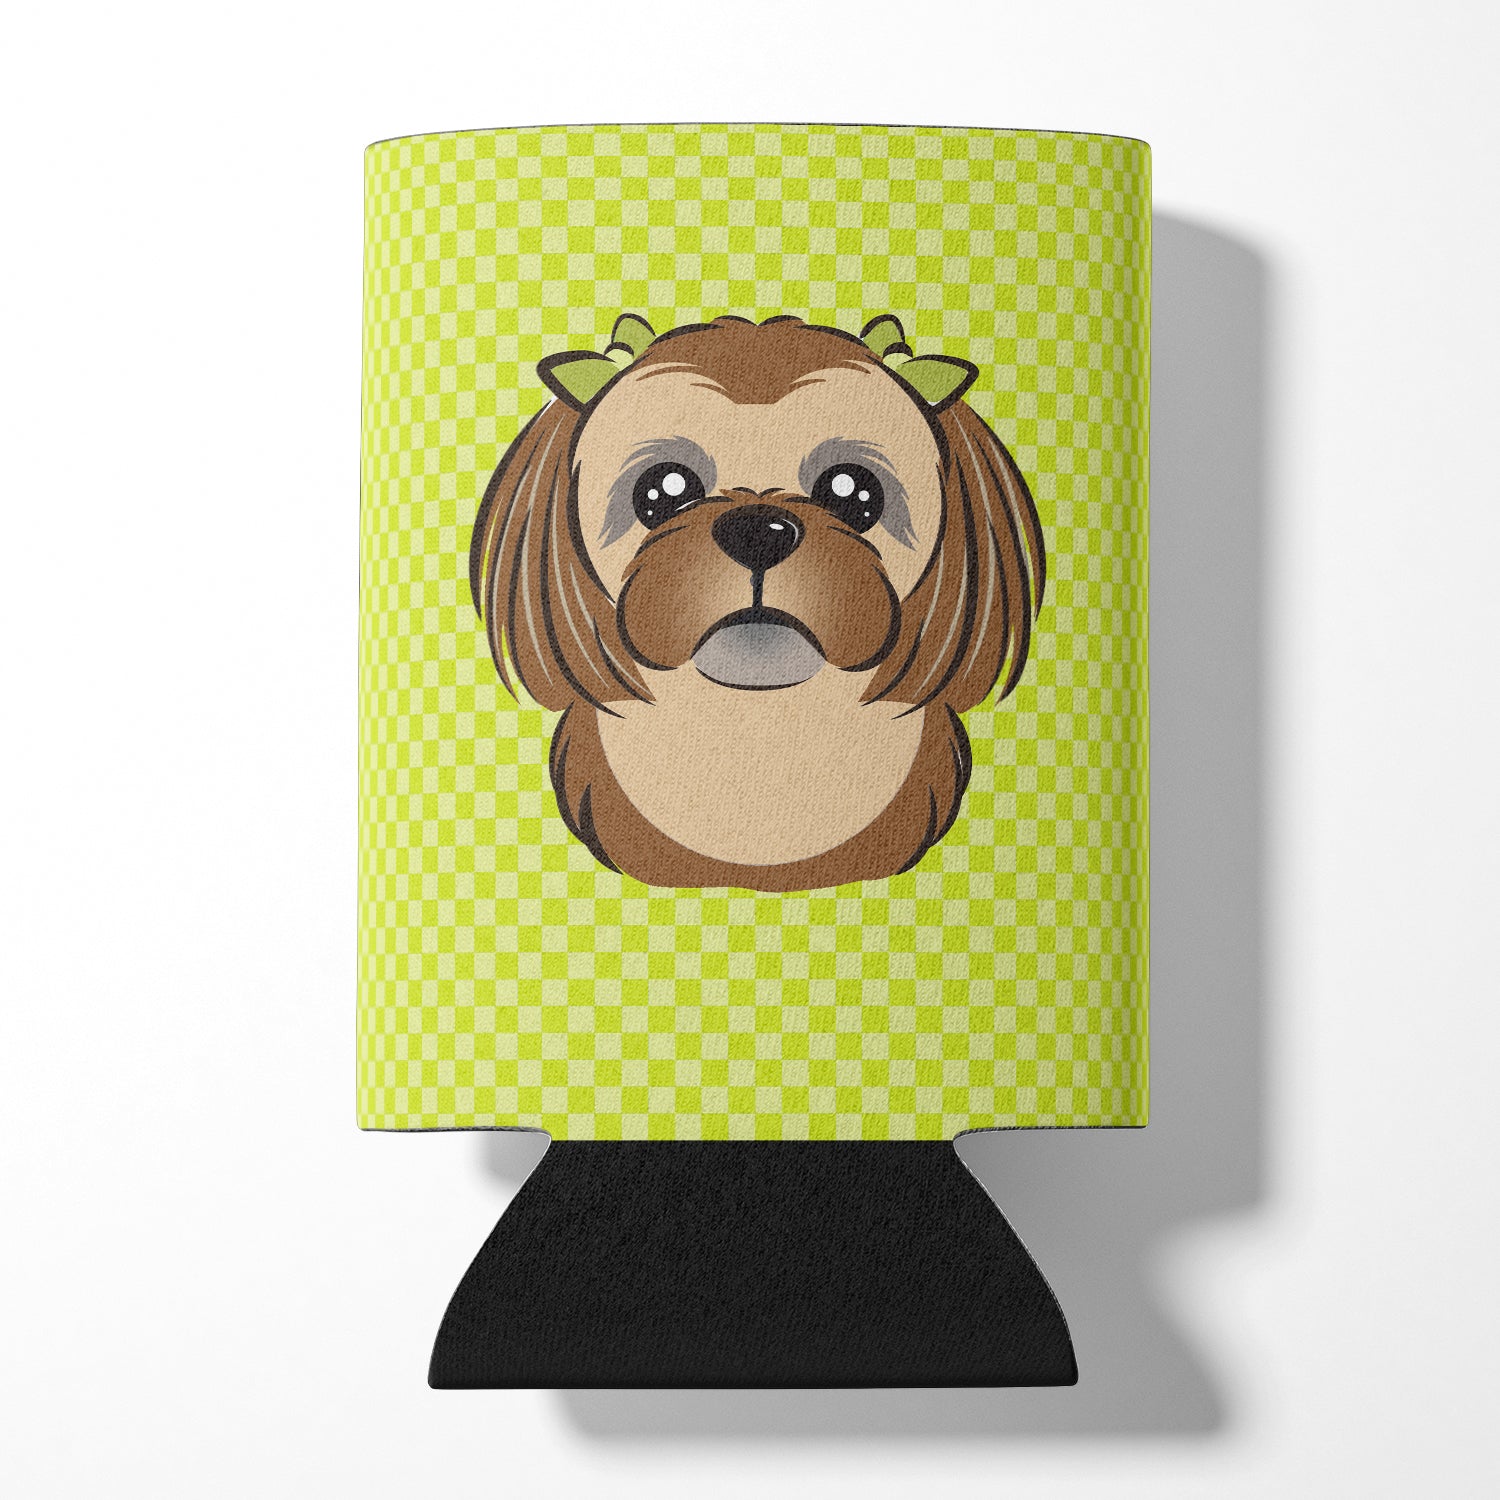 Checkerboard Lime Green Chocolate Brown Shih Tzu Can or Bottle Hugger BB1311CC